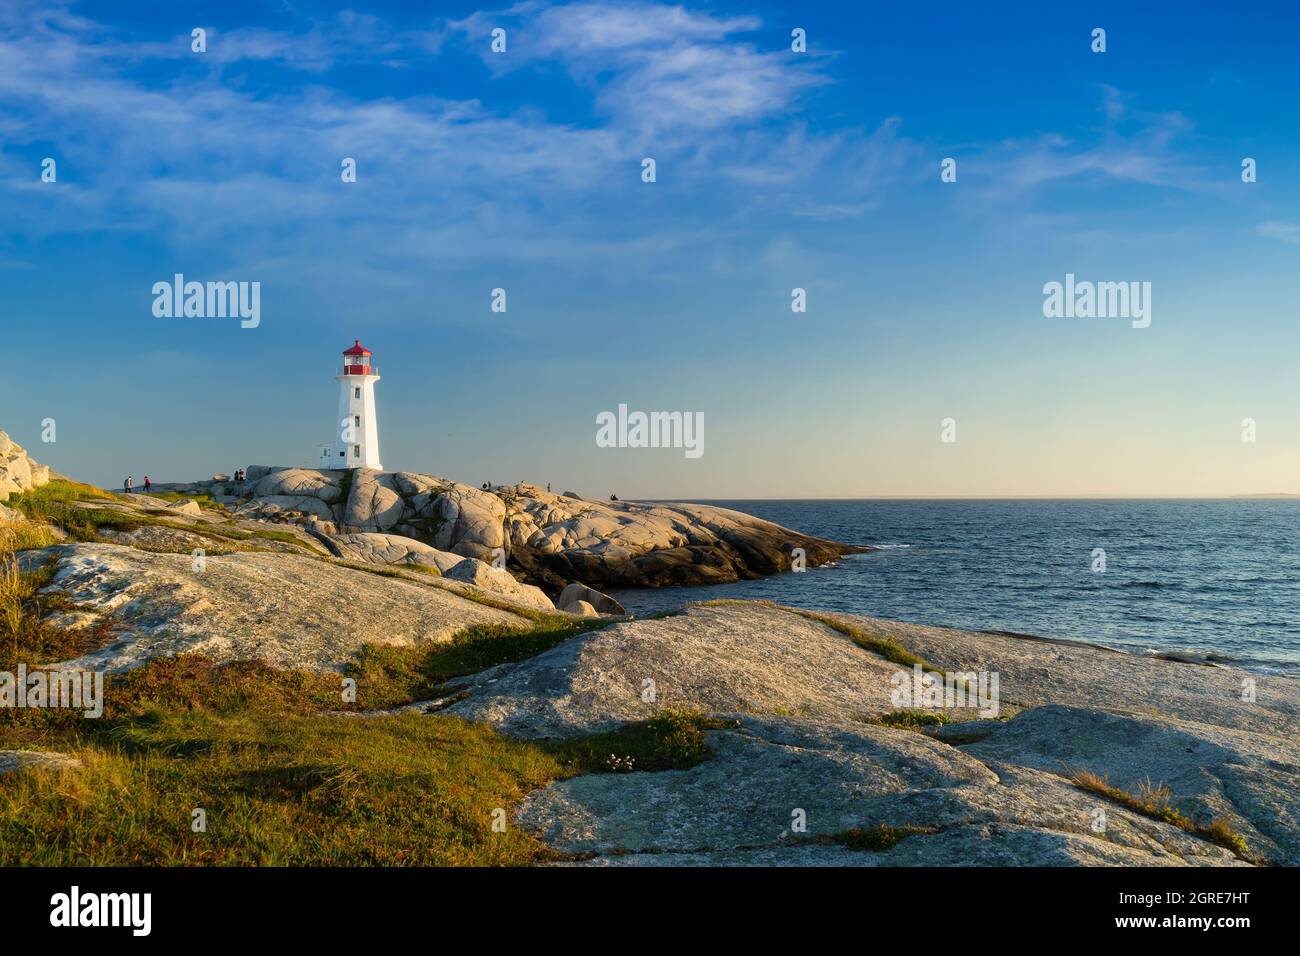 The iconic lighthouse overlooking the Atlantic at Peggy's Cove, Nova Scotia Canada. Stock Photo